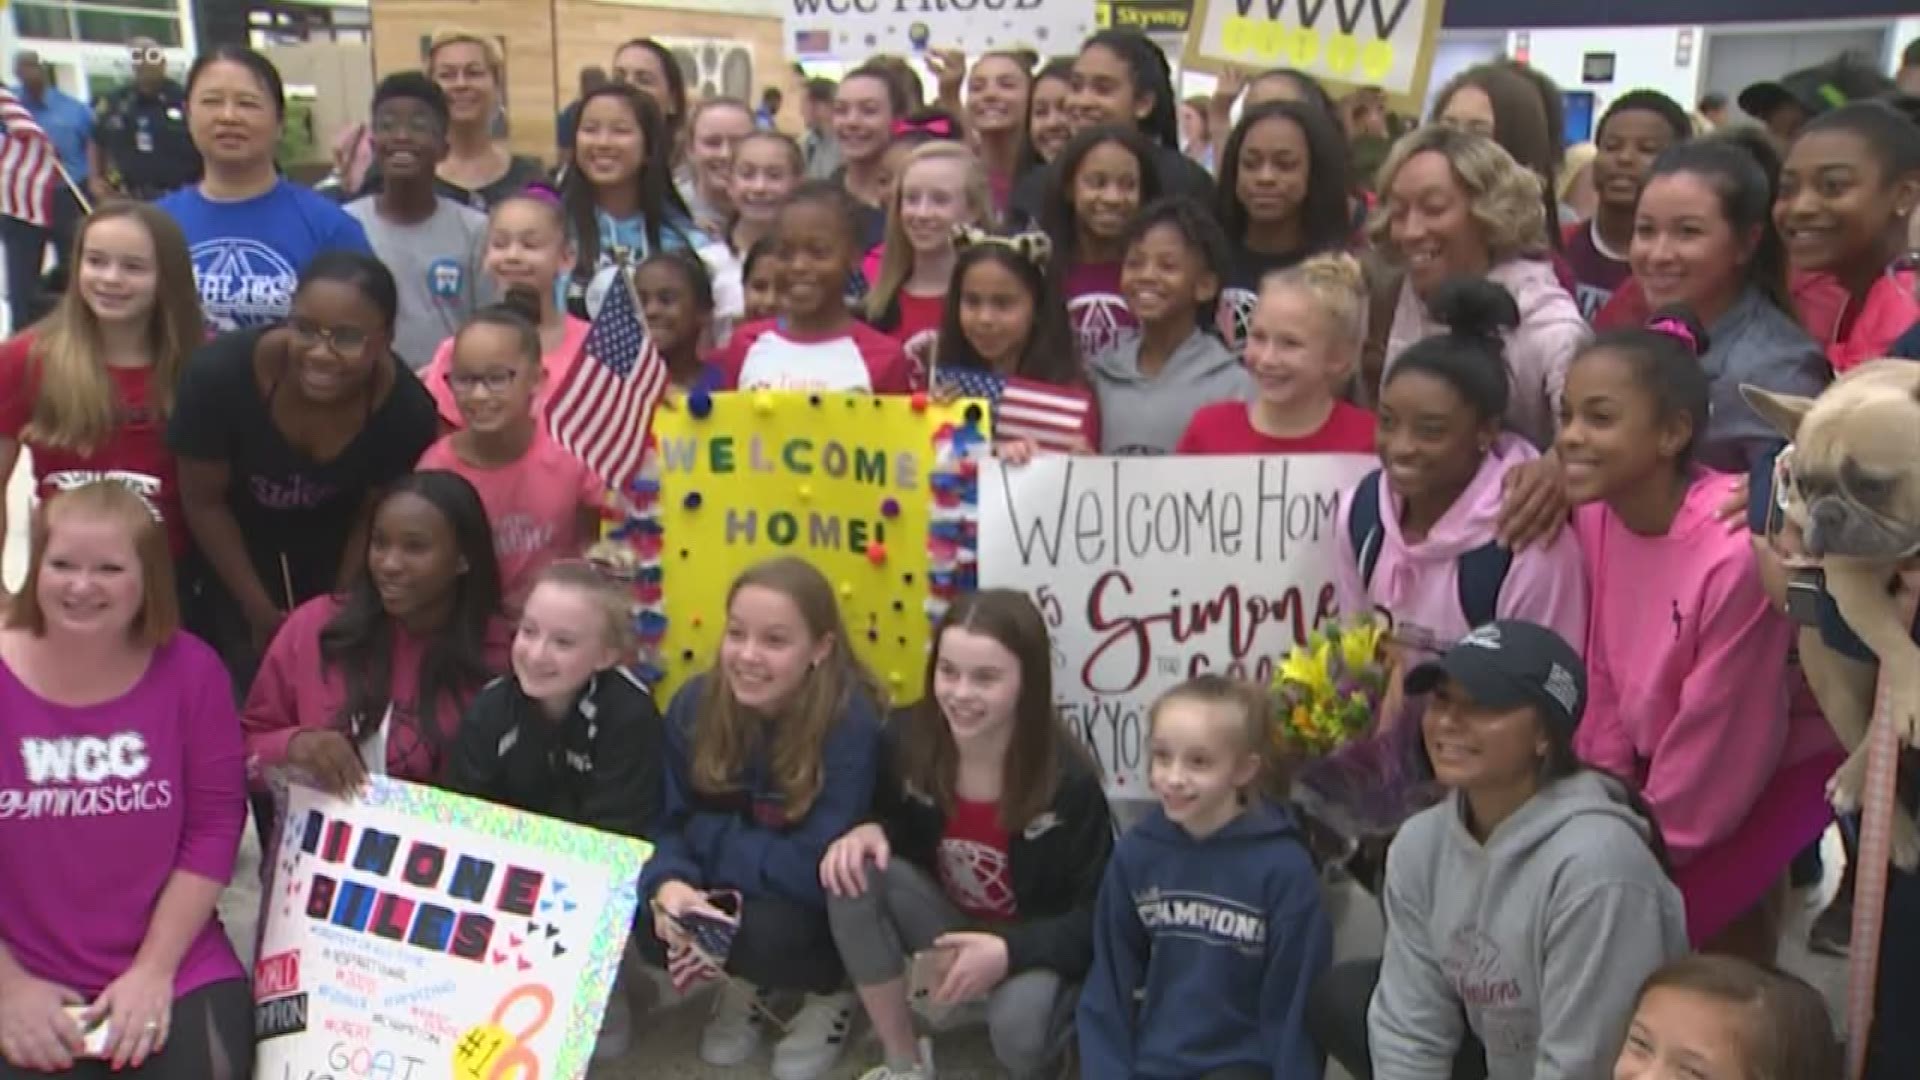 Simone Biles is back in Houston with her family, friends and teammates after competing in the World Championships in Germany.